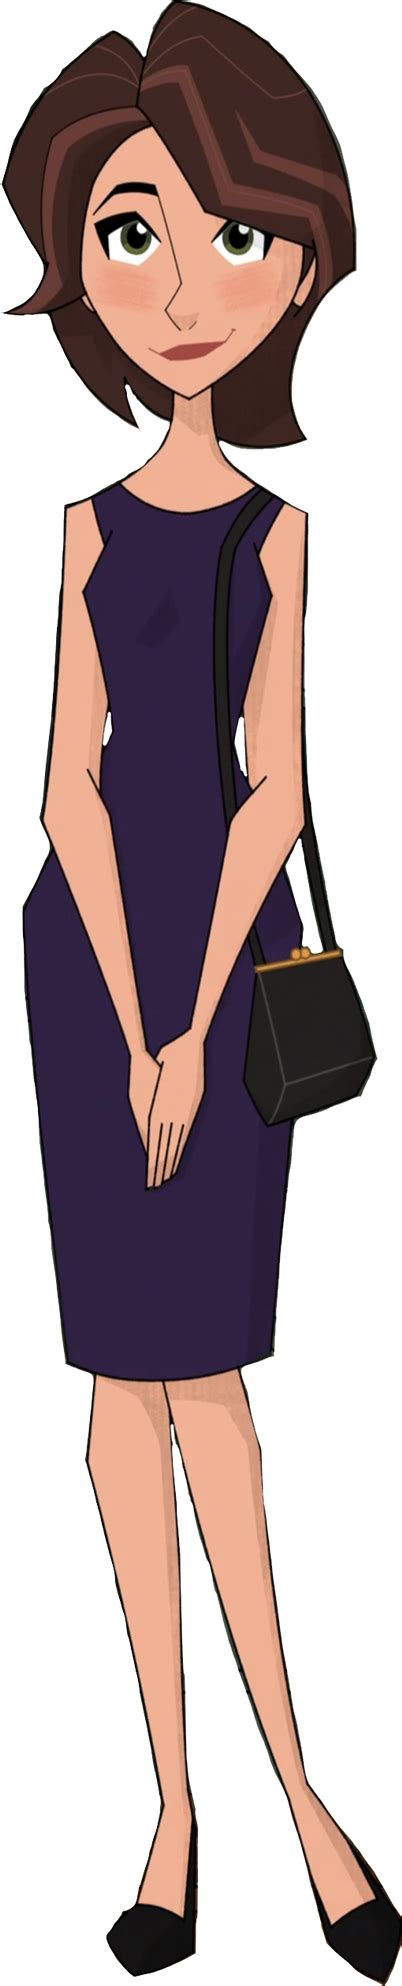 Aunt Cass Bh6 The Series In Her Dress Vector By Homersimpson1983 On Deviantart